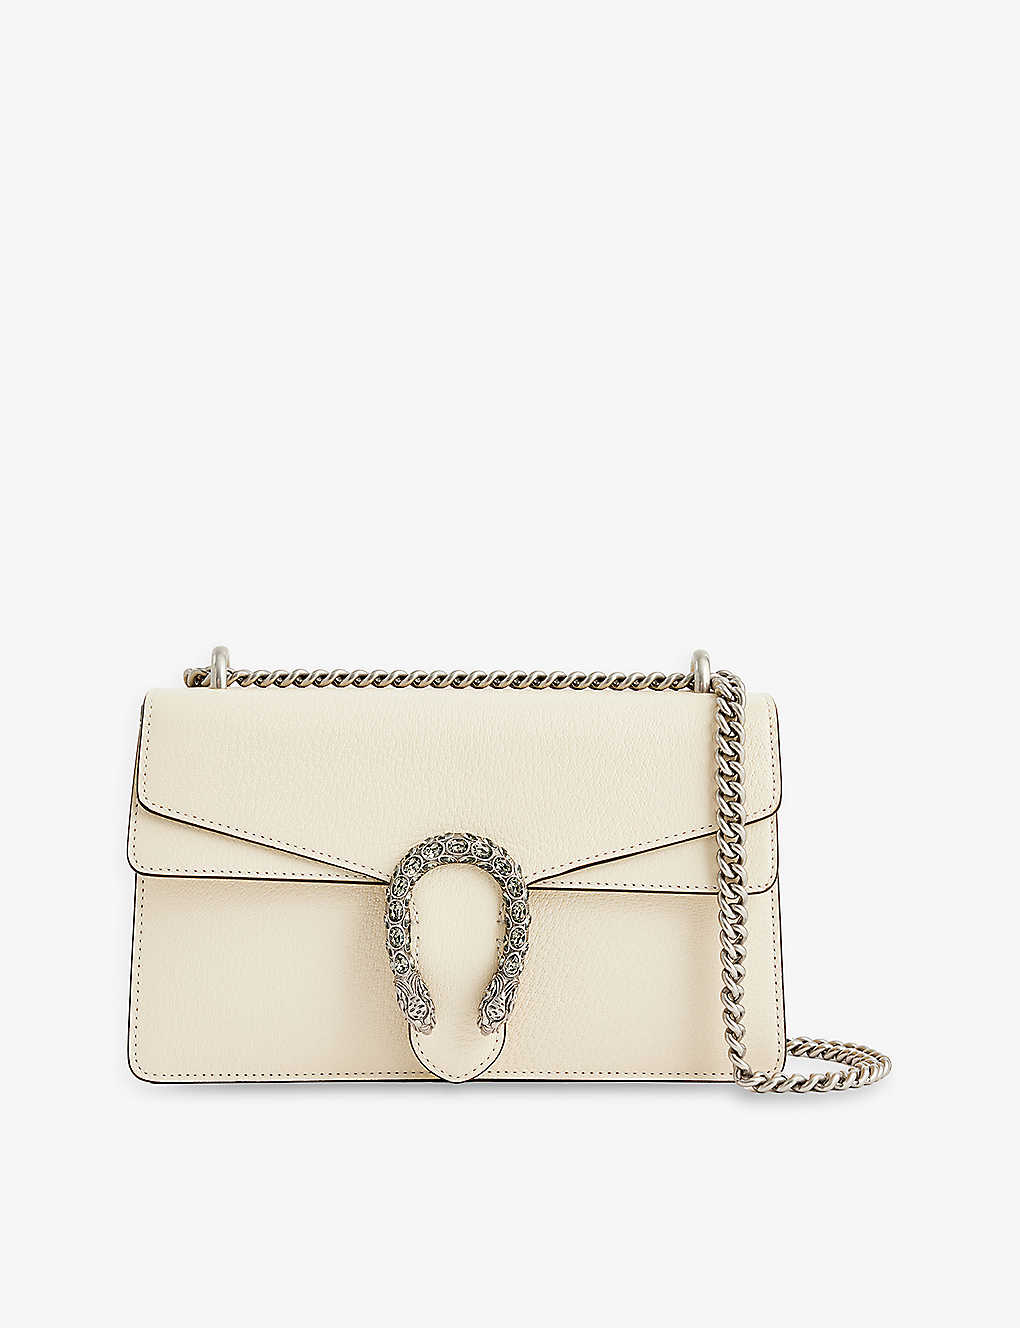 Gucci Dionysus Small Leather Cross-body Bag In Ivoire/black Diamond